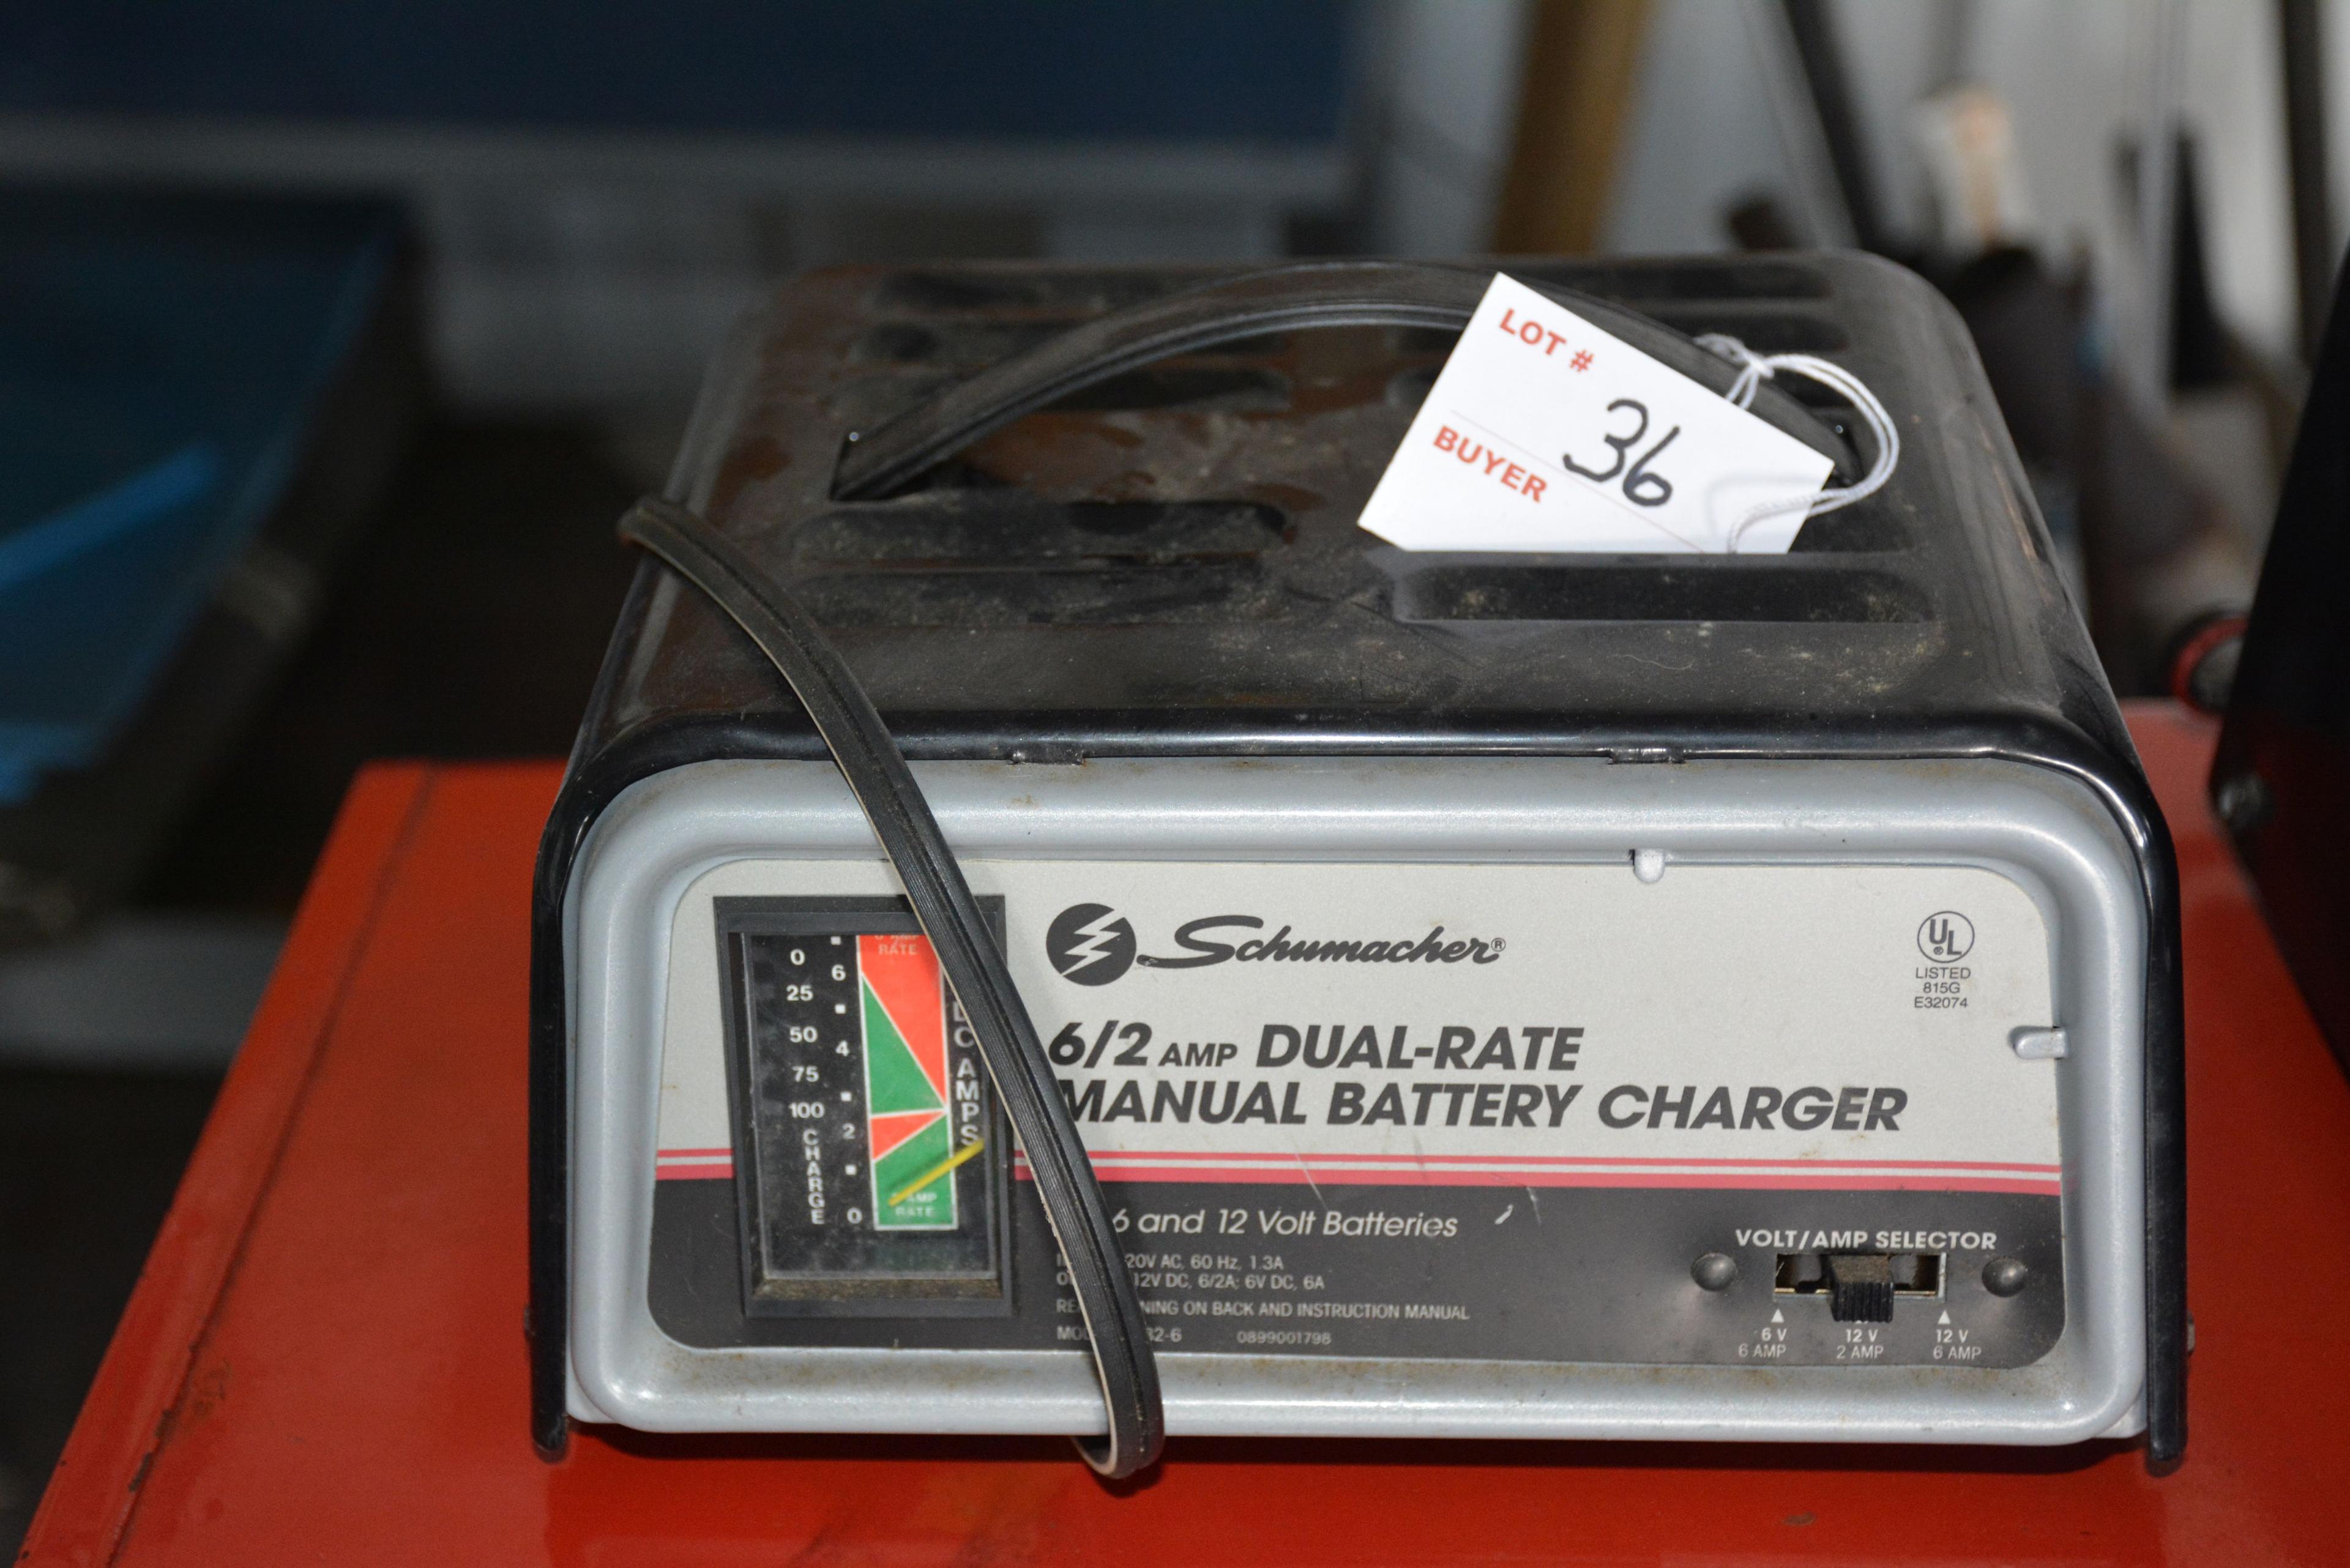 6/2 Amp Dual Rate Manual Battery Charger